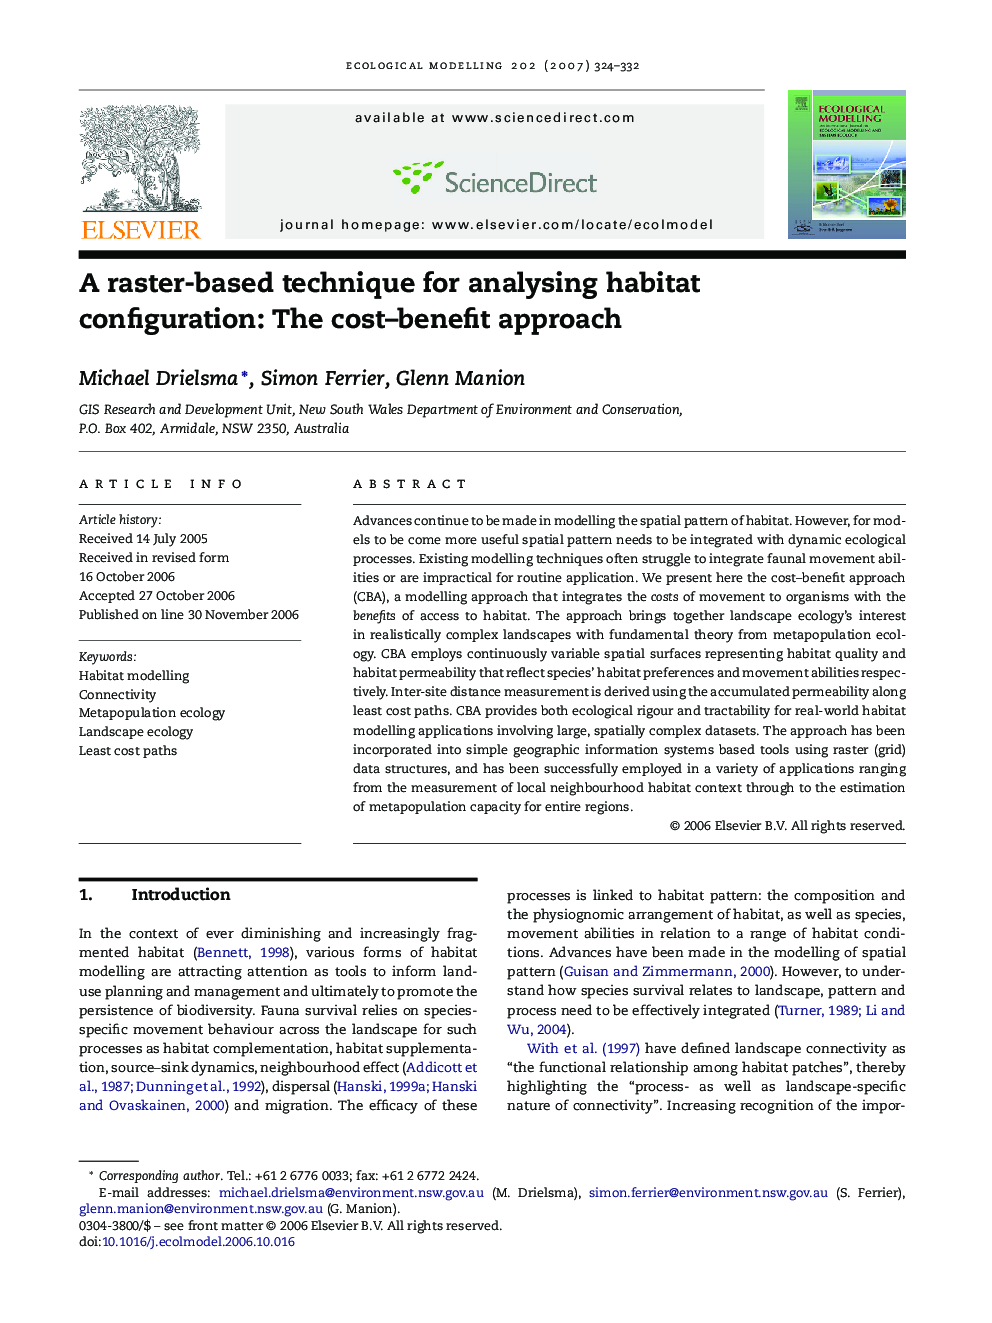 A raster-based technique for analysing habitat configuration: The cost-benefit approach